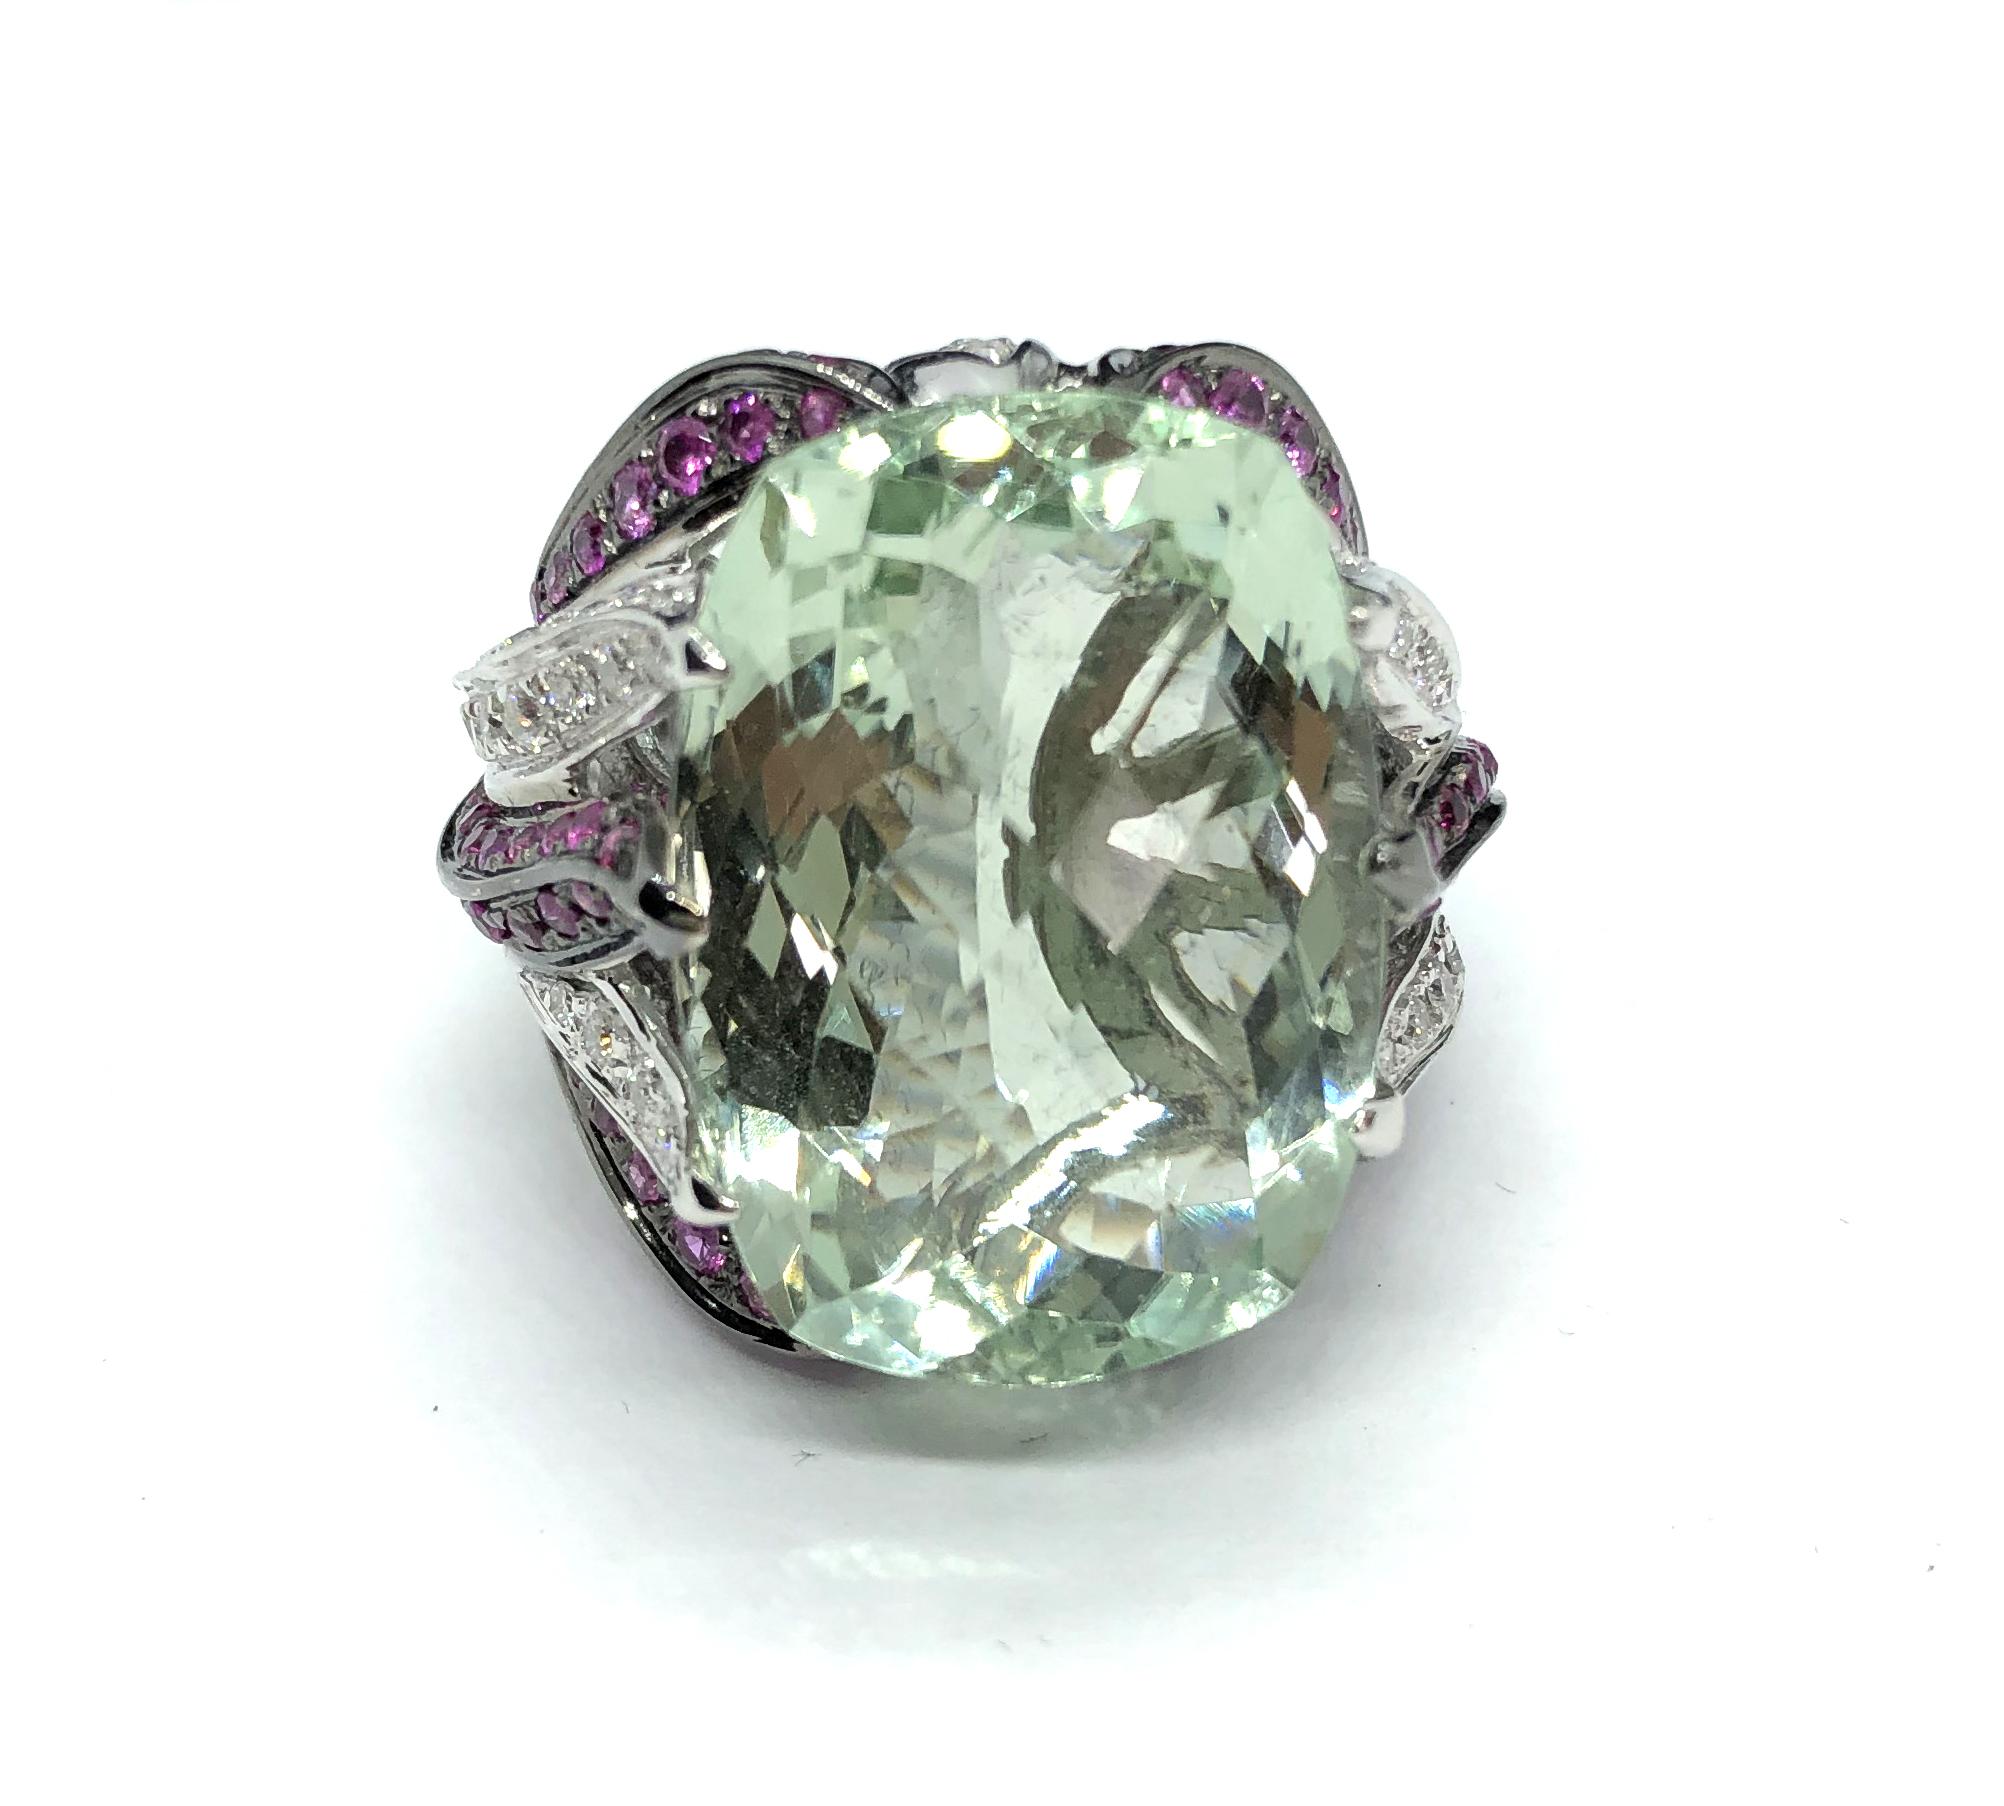 23 Ct Green Prasiolite White Gold Cocktail Ring Diamond and Pink Sapphires Flame For Sale 5